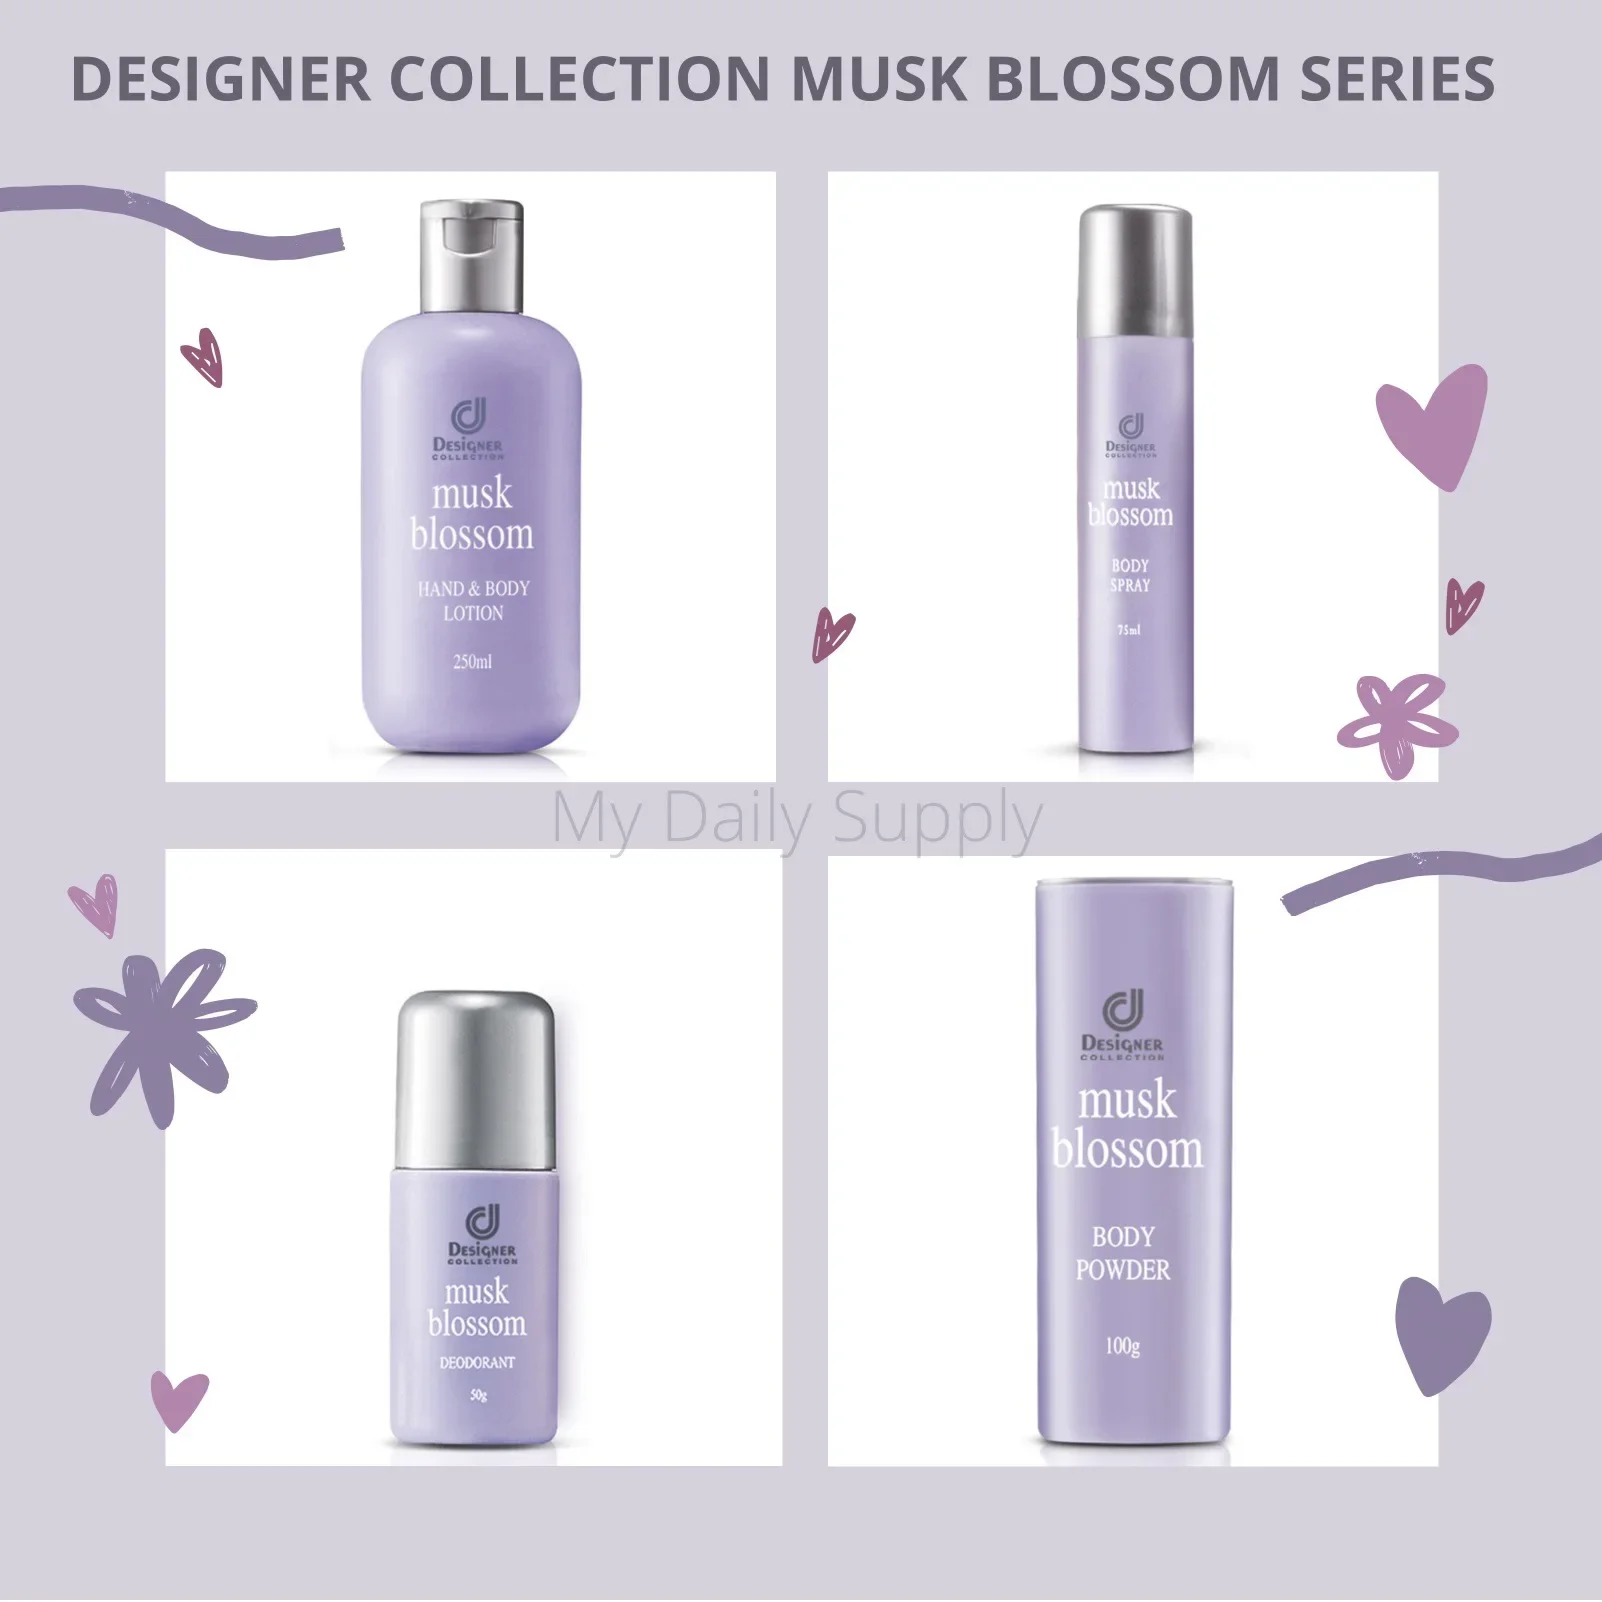 Designer Collection Musk Blossom Series